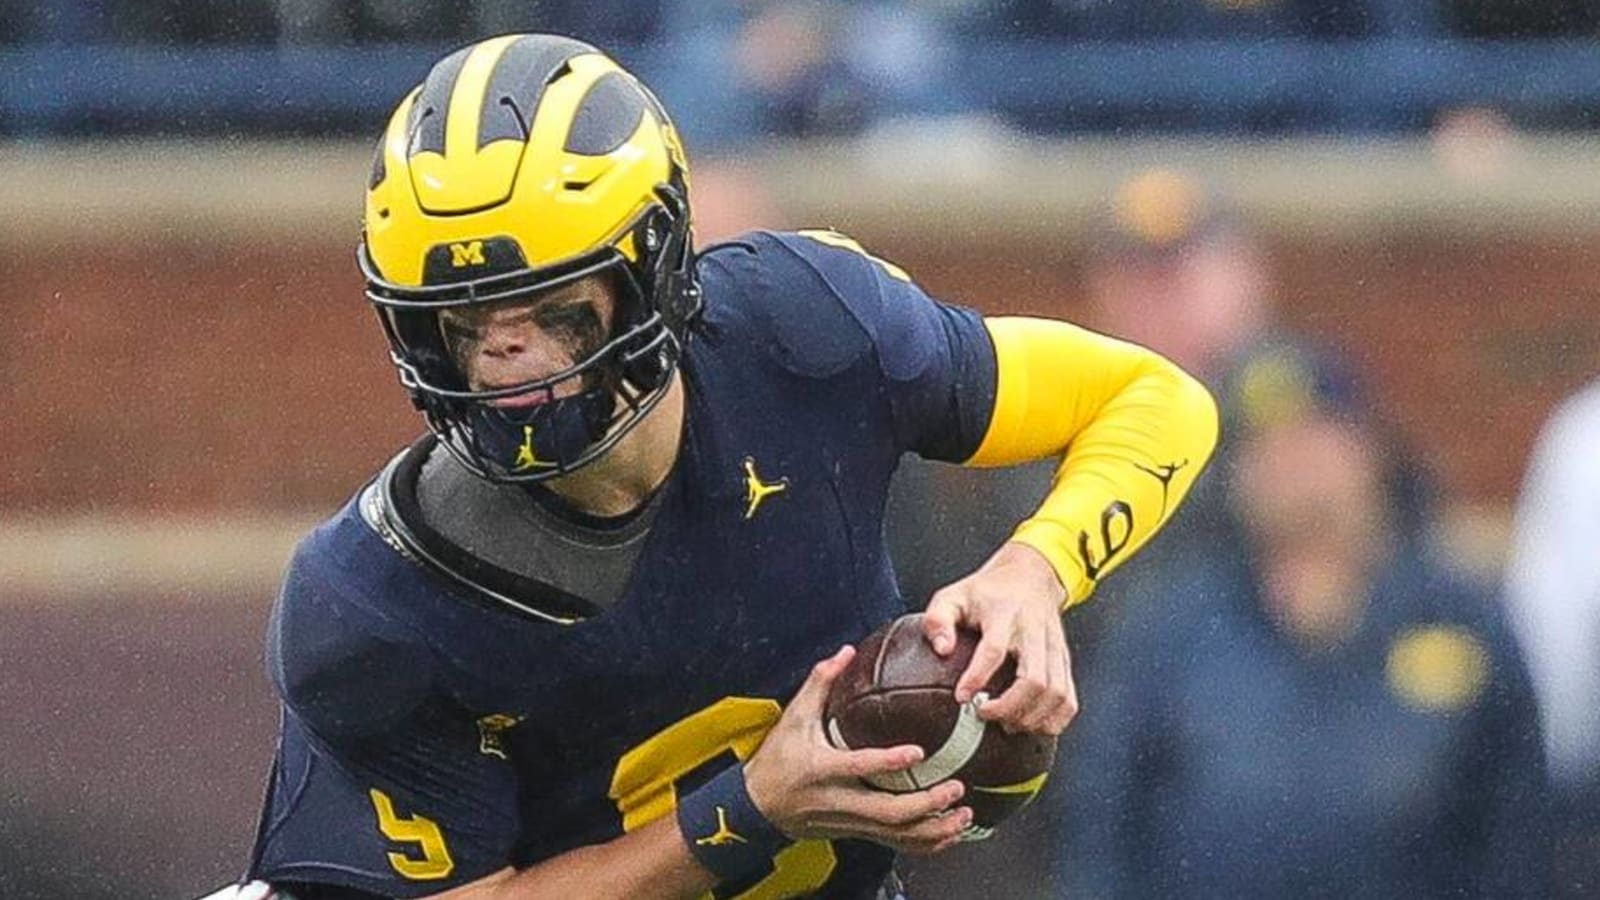 Watch: Michigan QB J.J. McCarthy completes unreal pass against Indiana